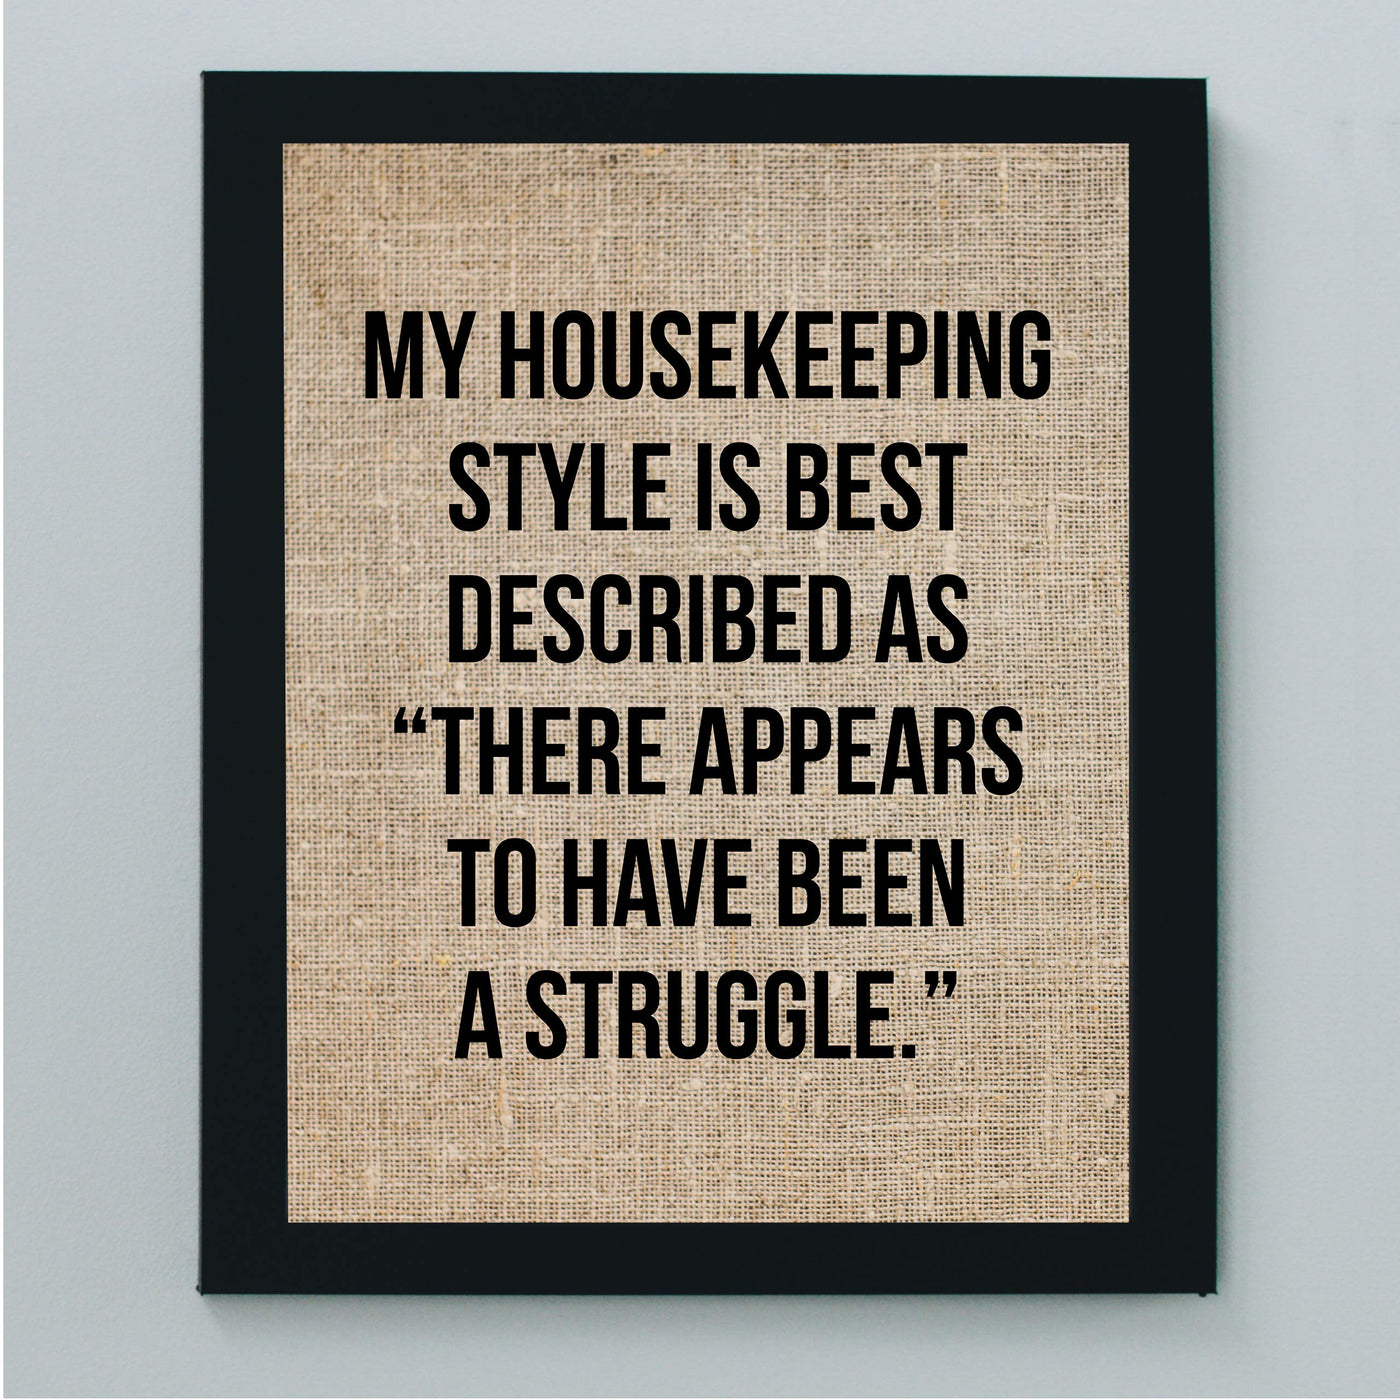 Housekeeping Style Is-Appears to Have Been a Struggle Funny Wall Sign-8 x 10" Rustic Typographic Art Print-Ready to Frame. Humorous Family Decor for Home-Farmhouse. Great Welcome Sign and Fun Gift!